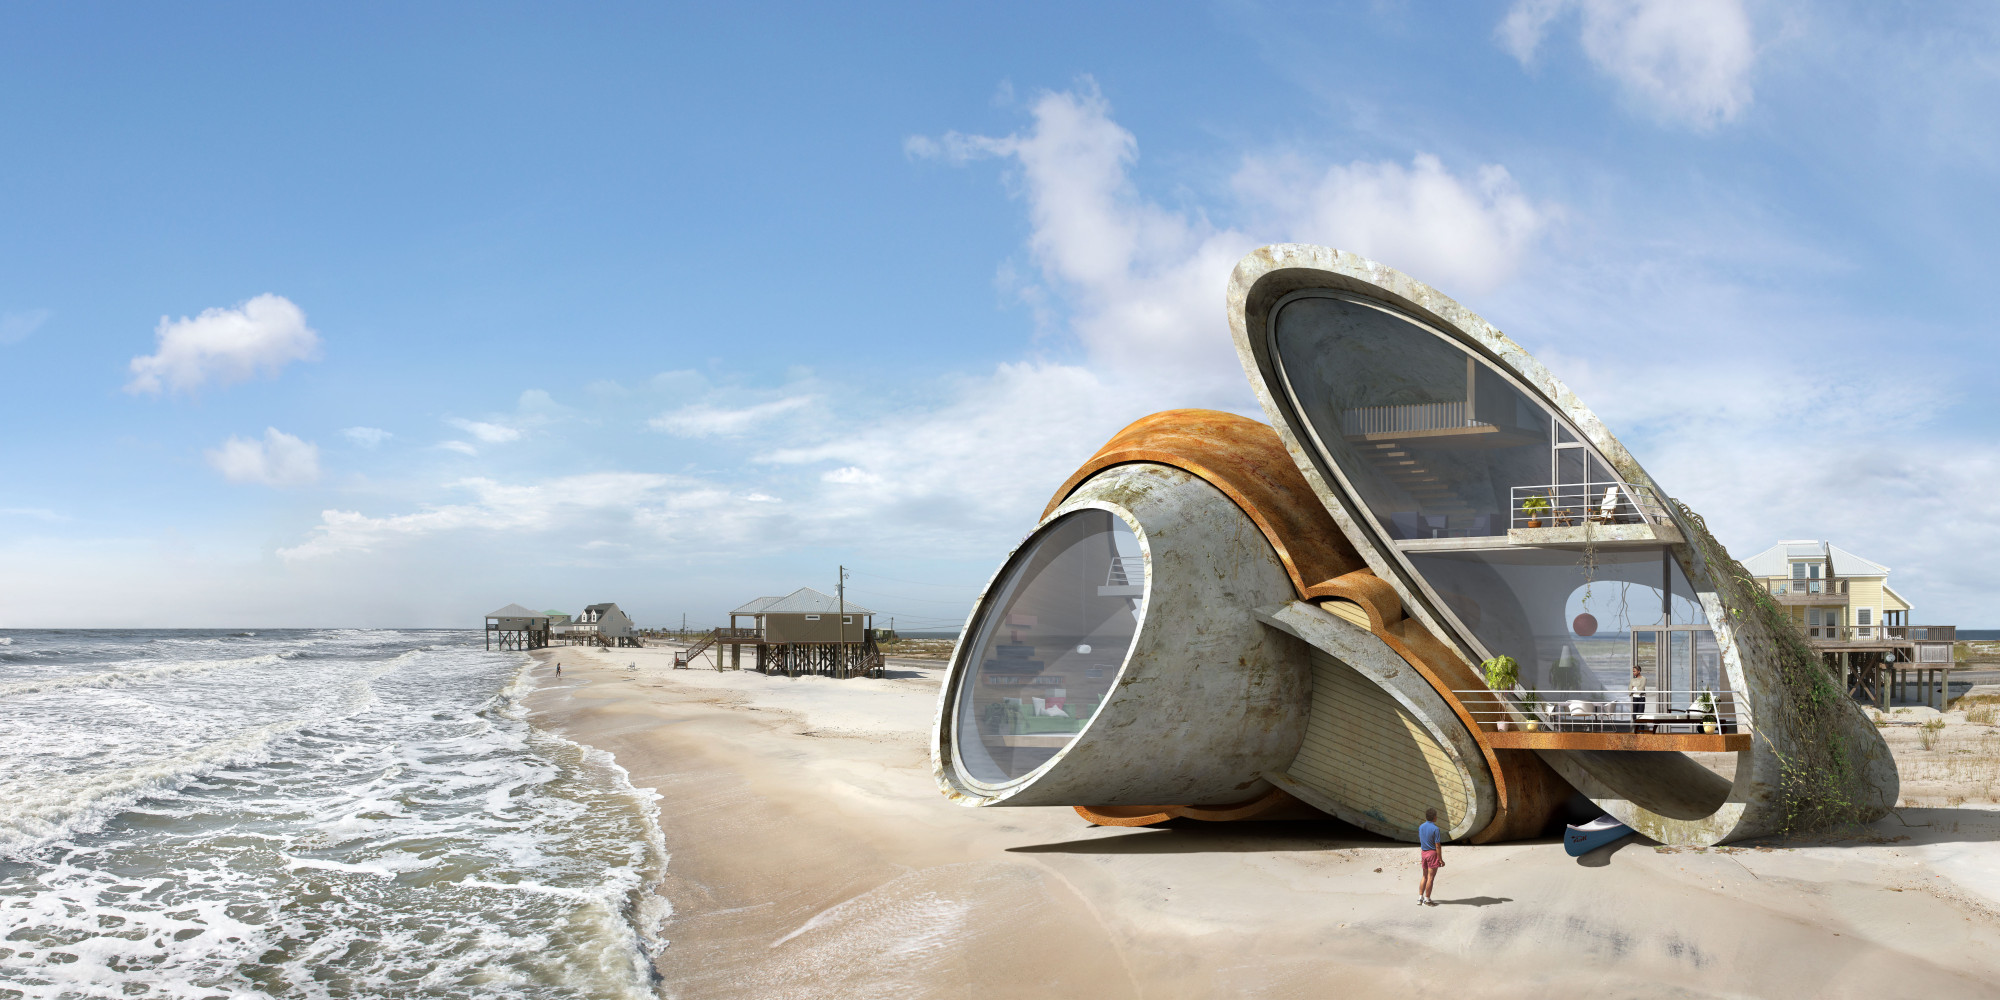 Artist Designs Surreal Futuristic Forts That Can Withstand Natural